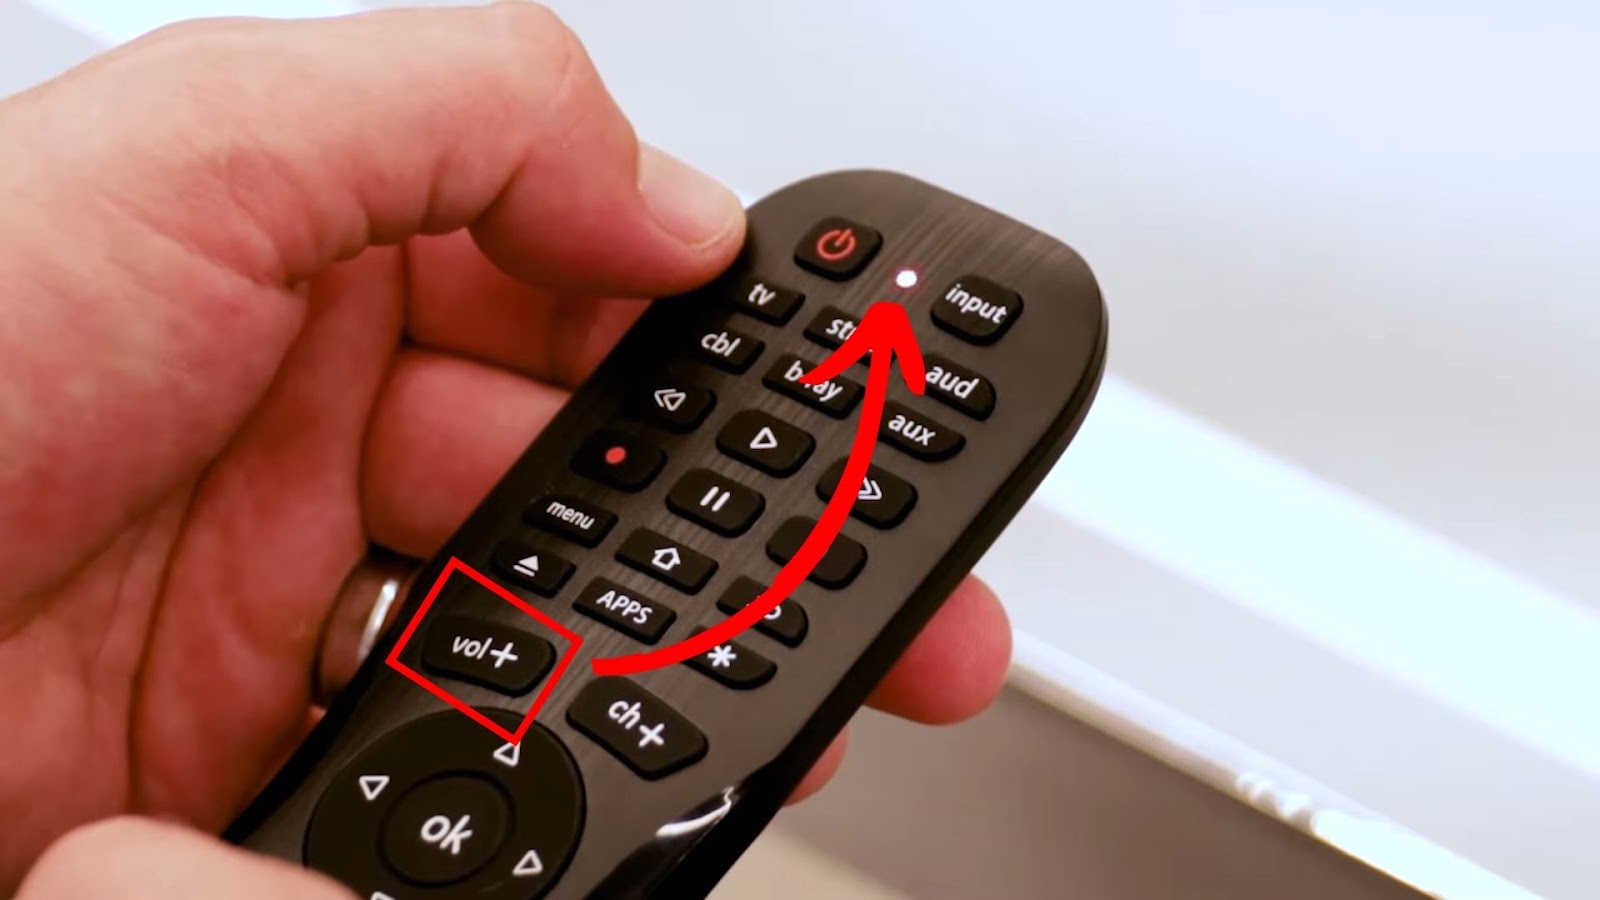 Volume + Button for 4-digit Code